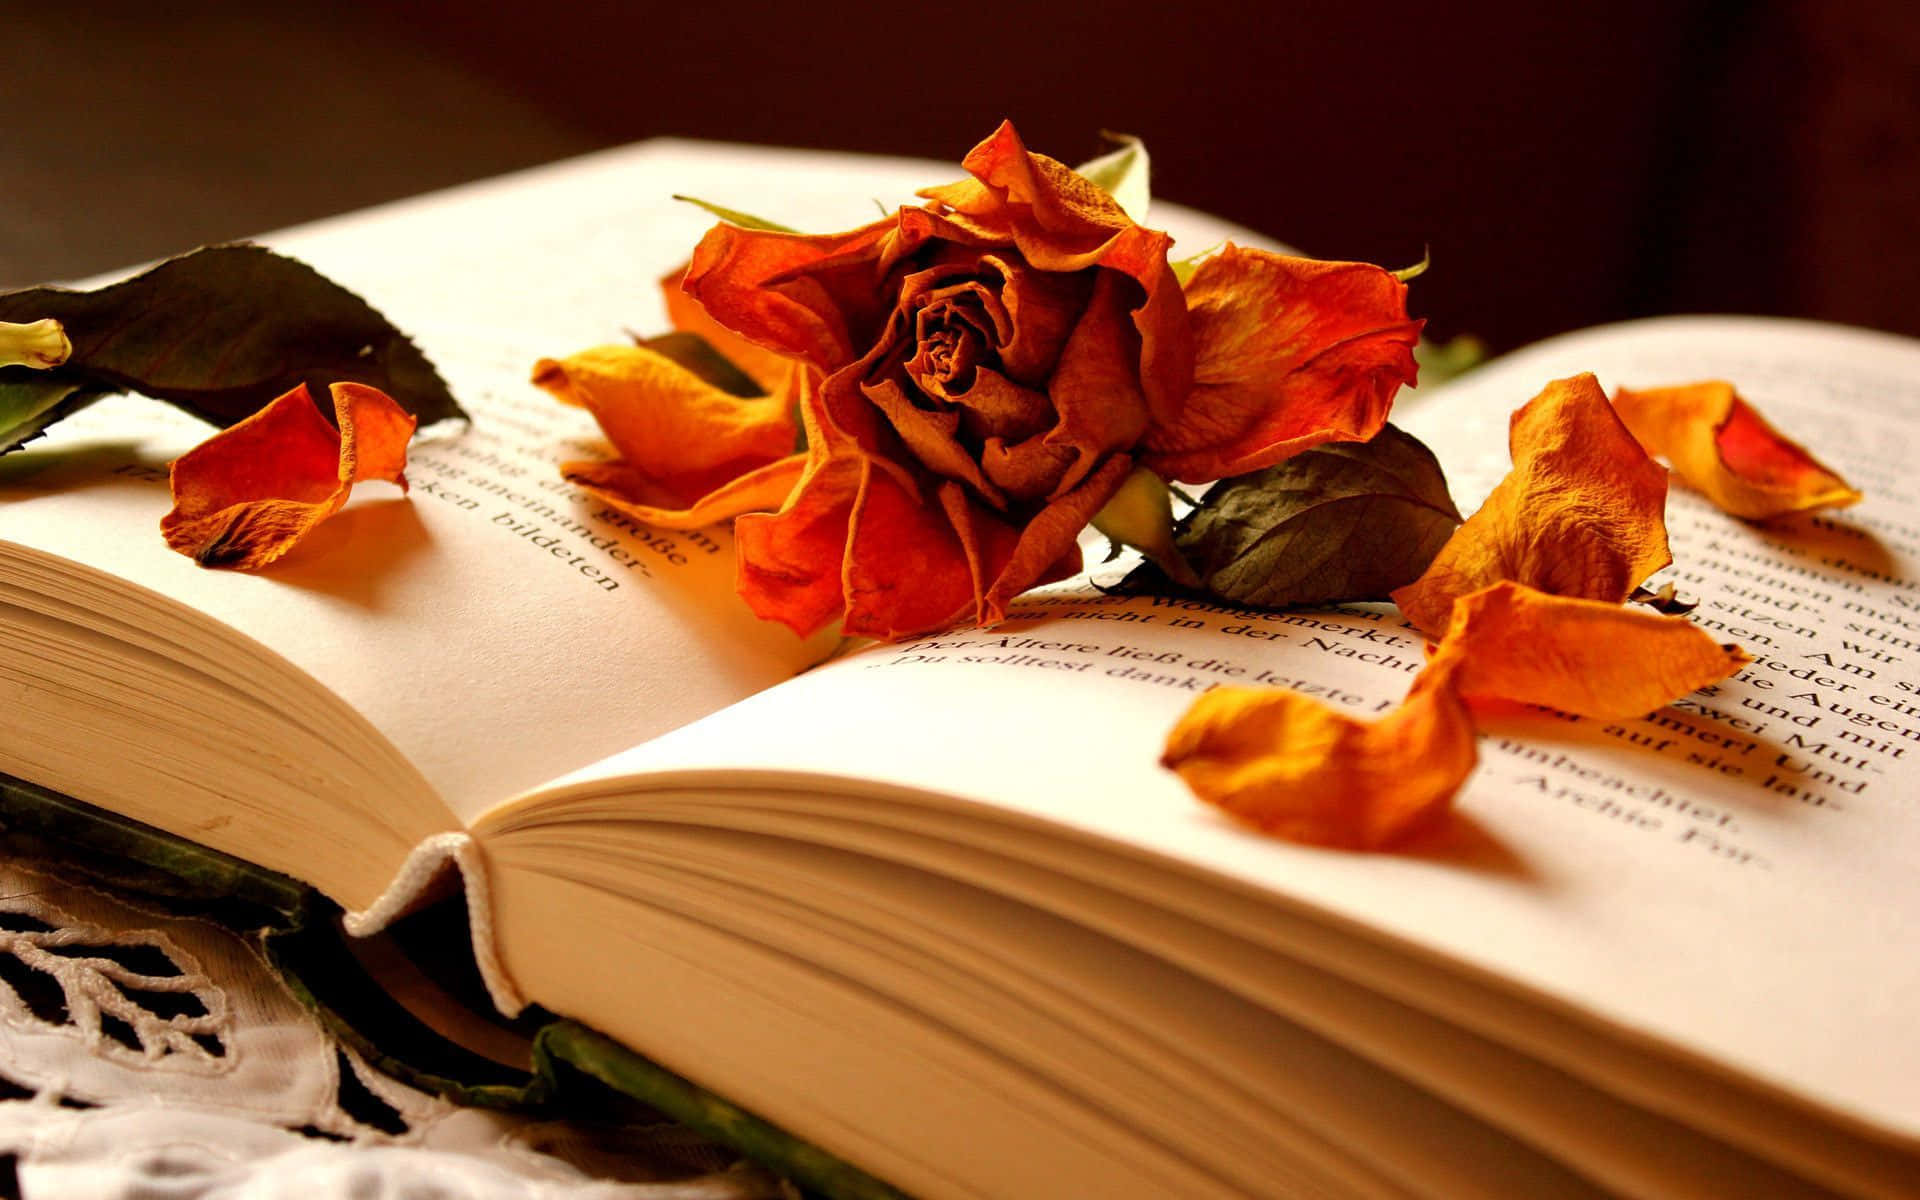 A Book With Roses On It